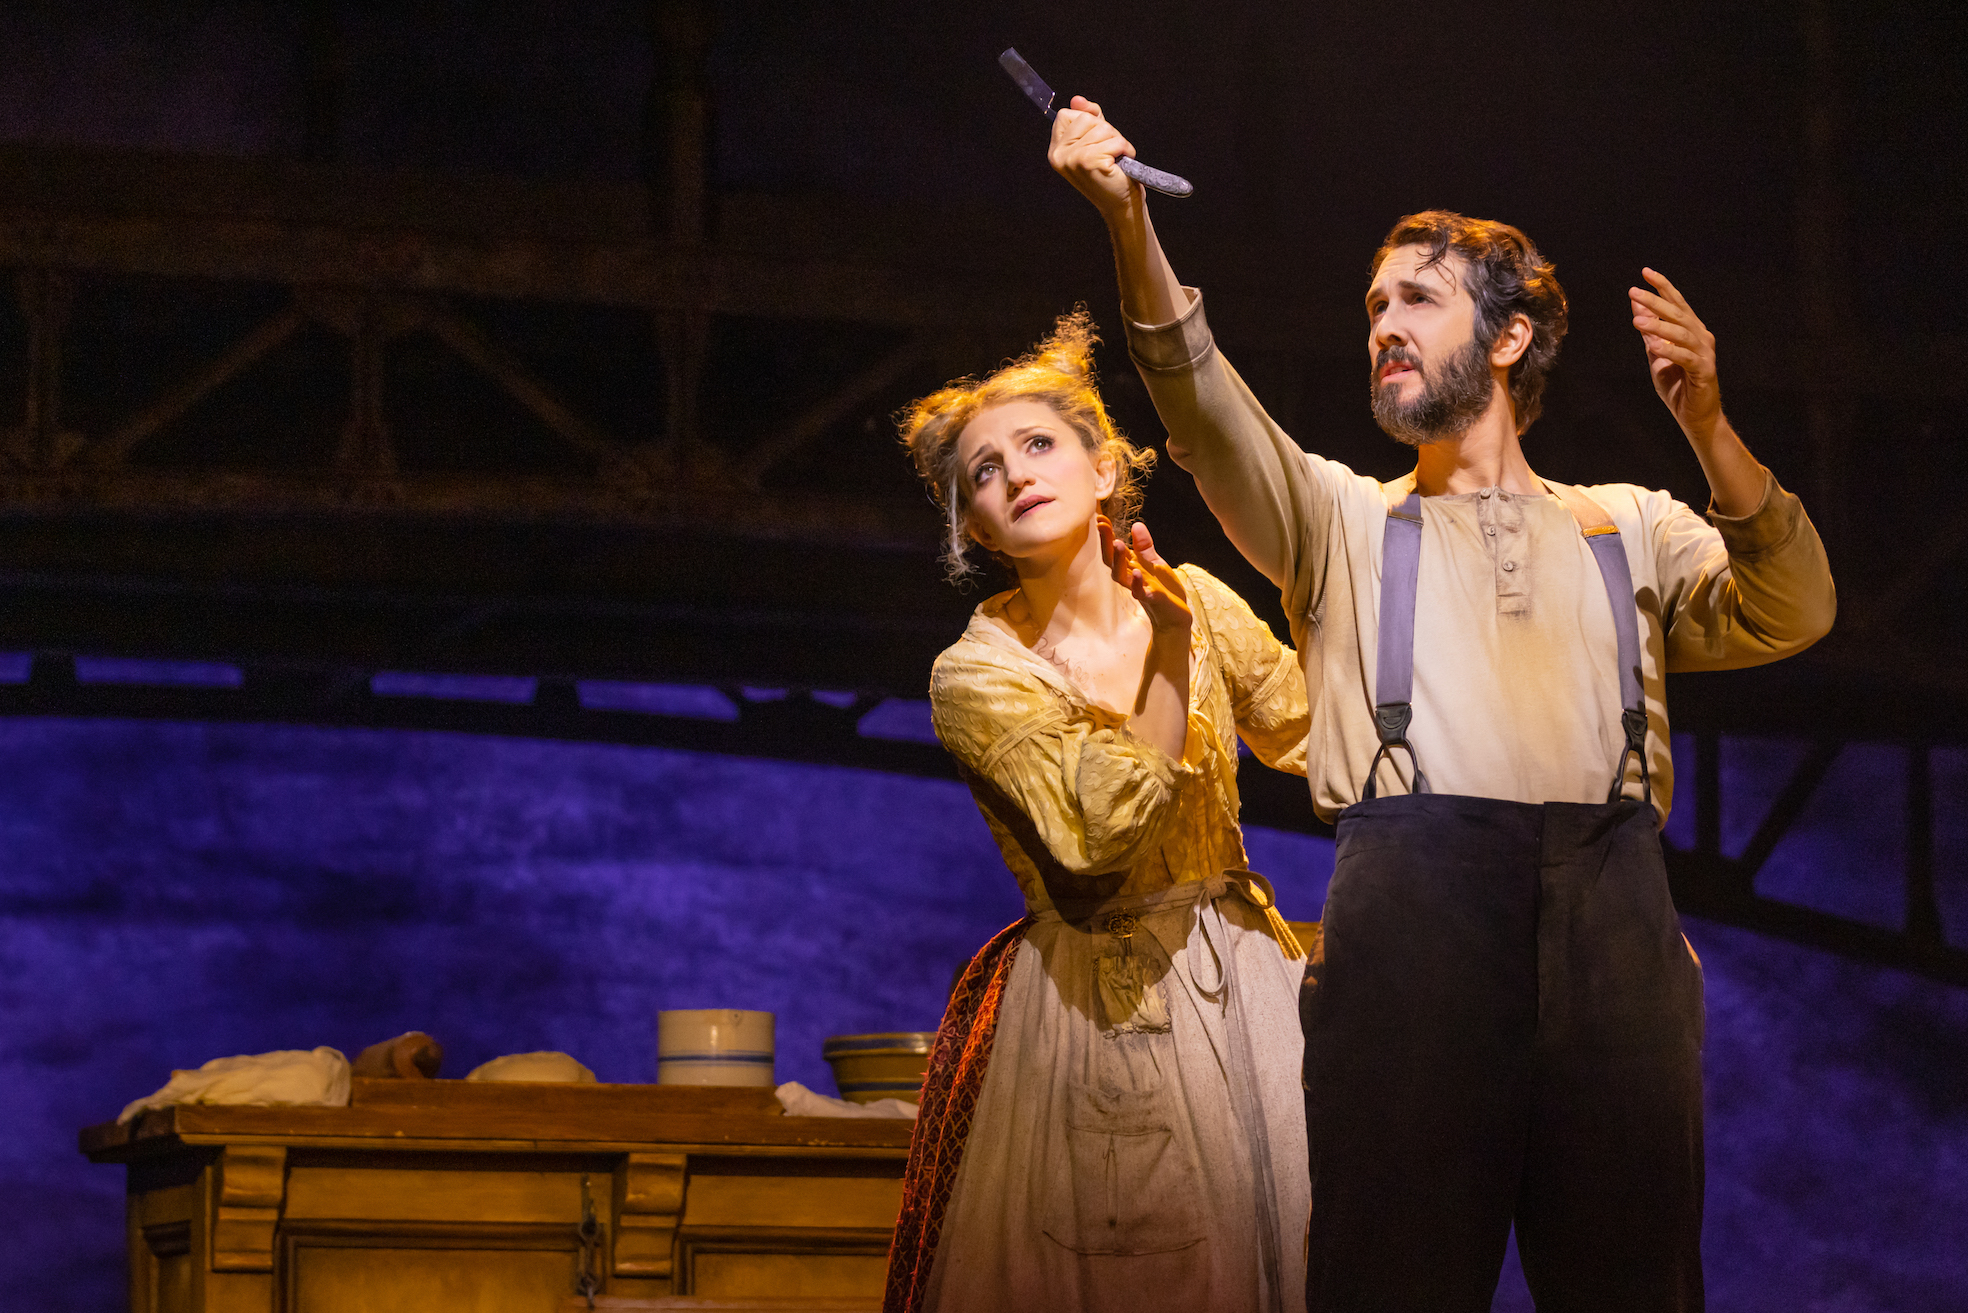 Ashford　Todd　and　with　Josh　Groban　Annaleigh　Review:　Sweeney